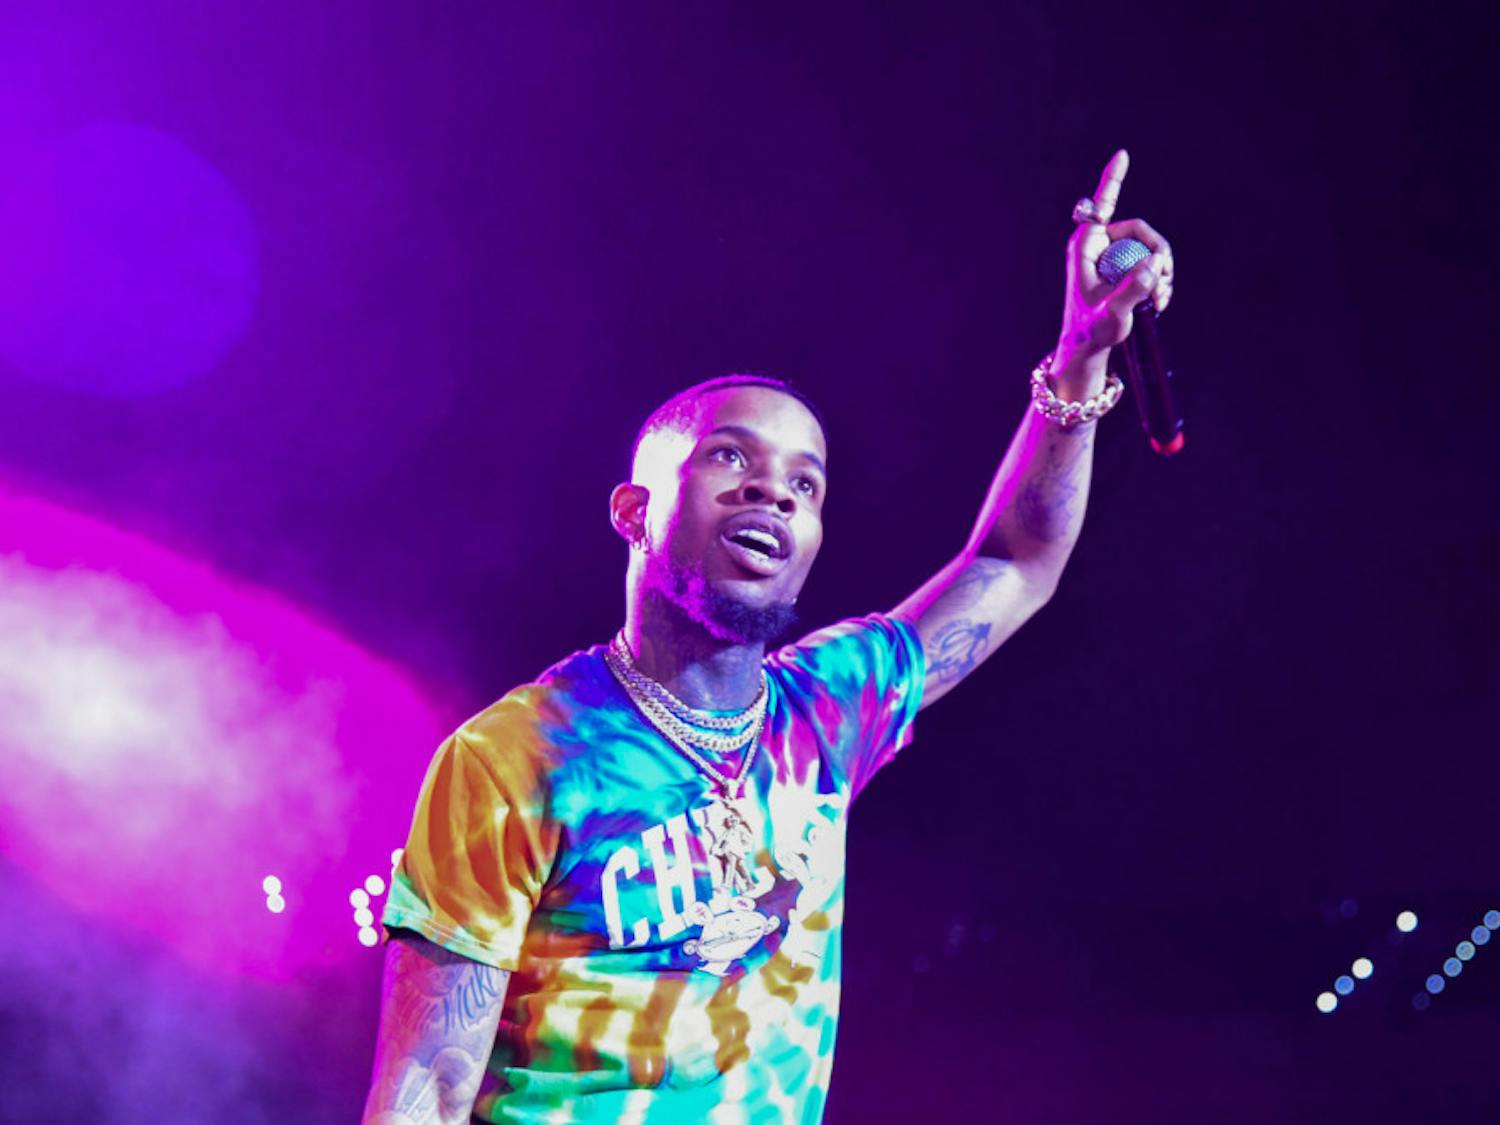 Tory Lanez sings his first song to the audience at the O'Connell Center Monday night, but stops in between songs to smile at the crowd. More than 3,000 people came to see Lanez perform.